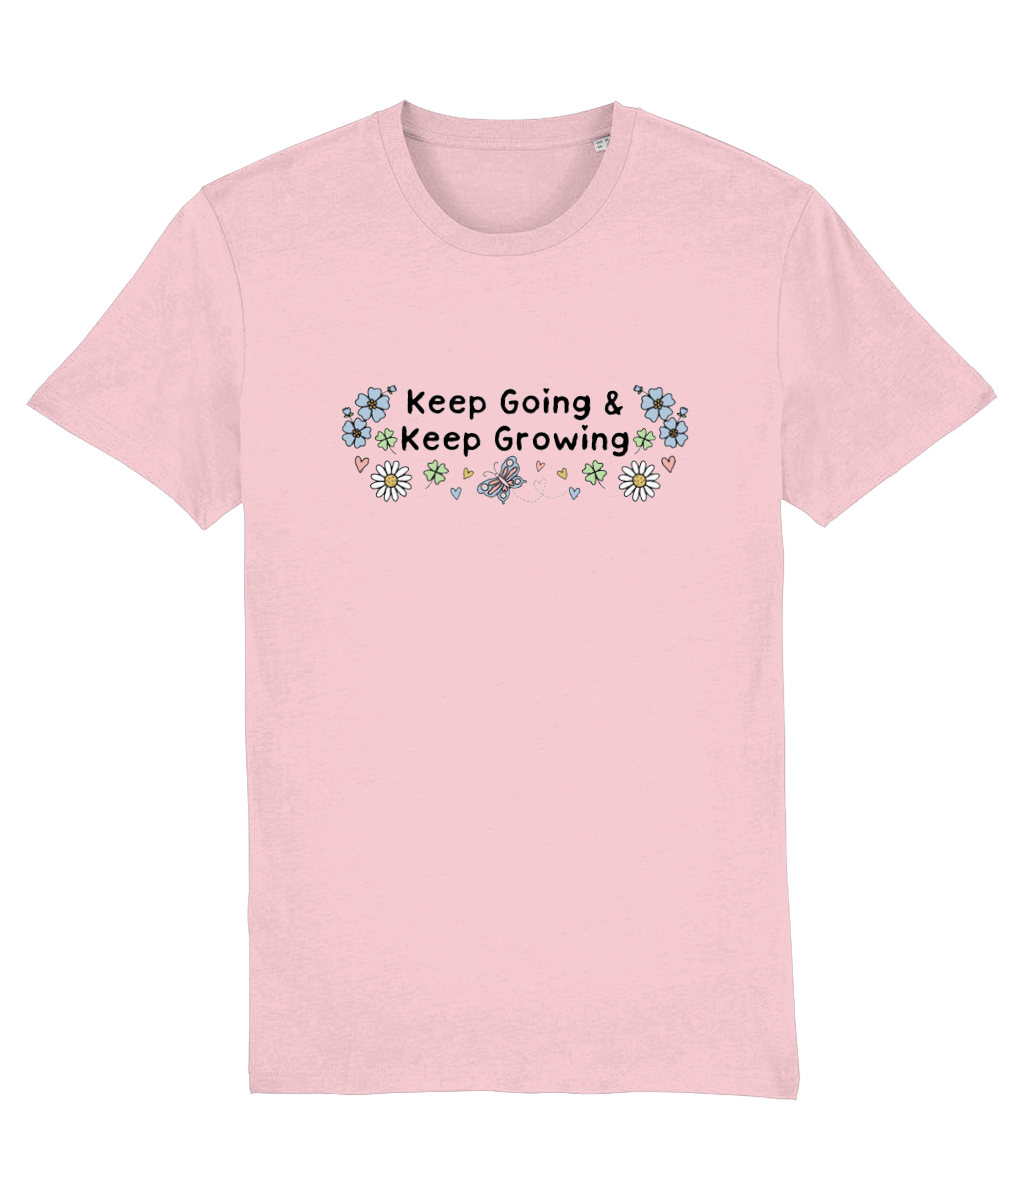 Floral Keep Going & Keep Growing - Adult T-Shirt - Light Multi Colour Available